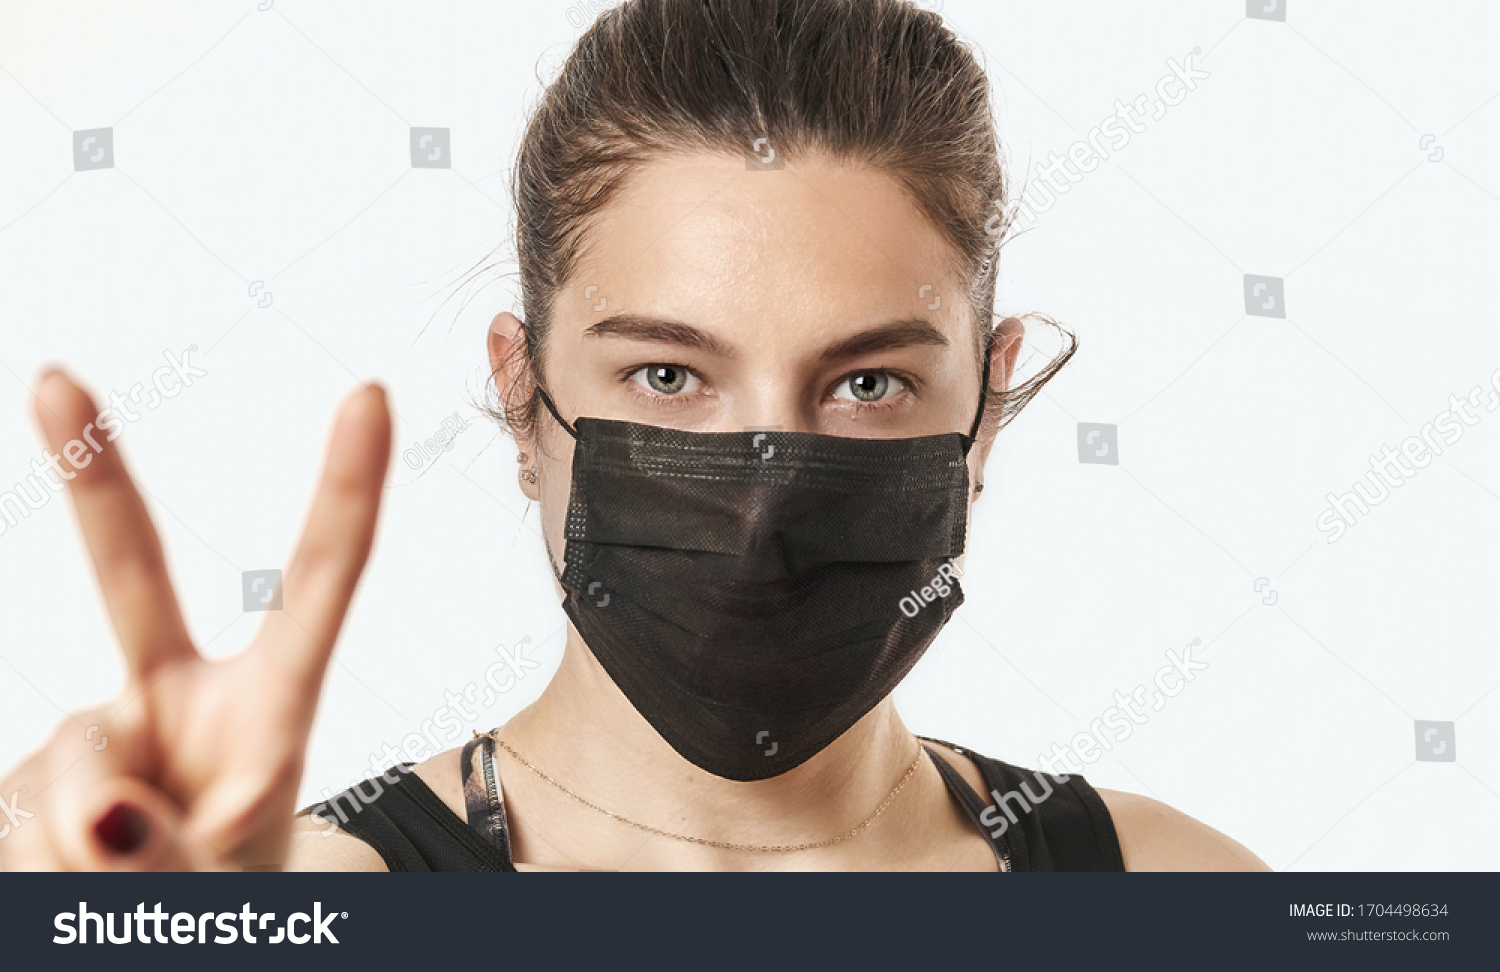 A close-up portrait of a pretty female wearing a surgical mask isolated on a white background #1704498634